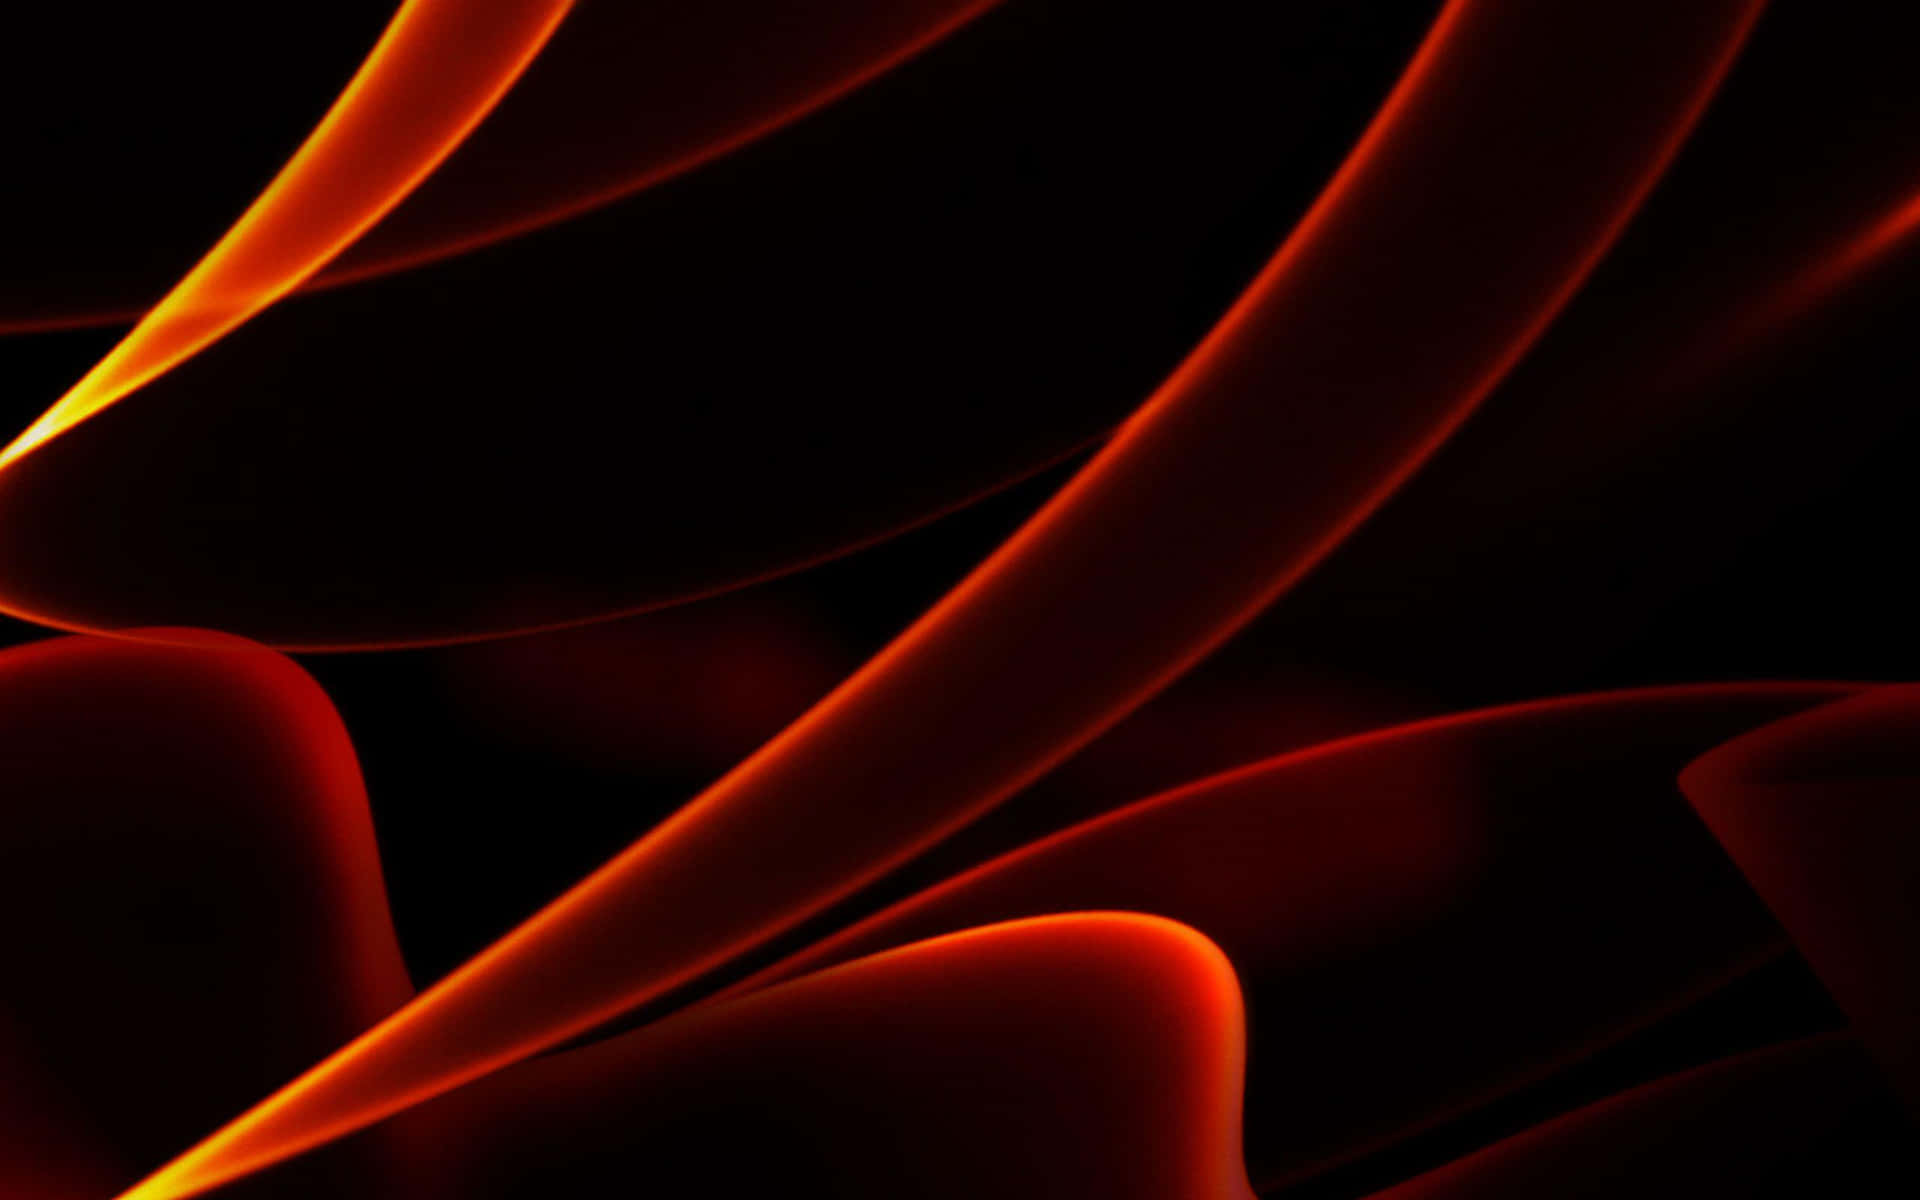 A Mysterious Dark Abstract Background